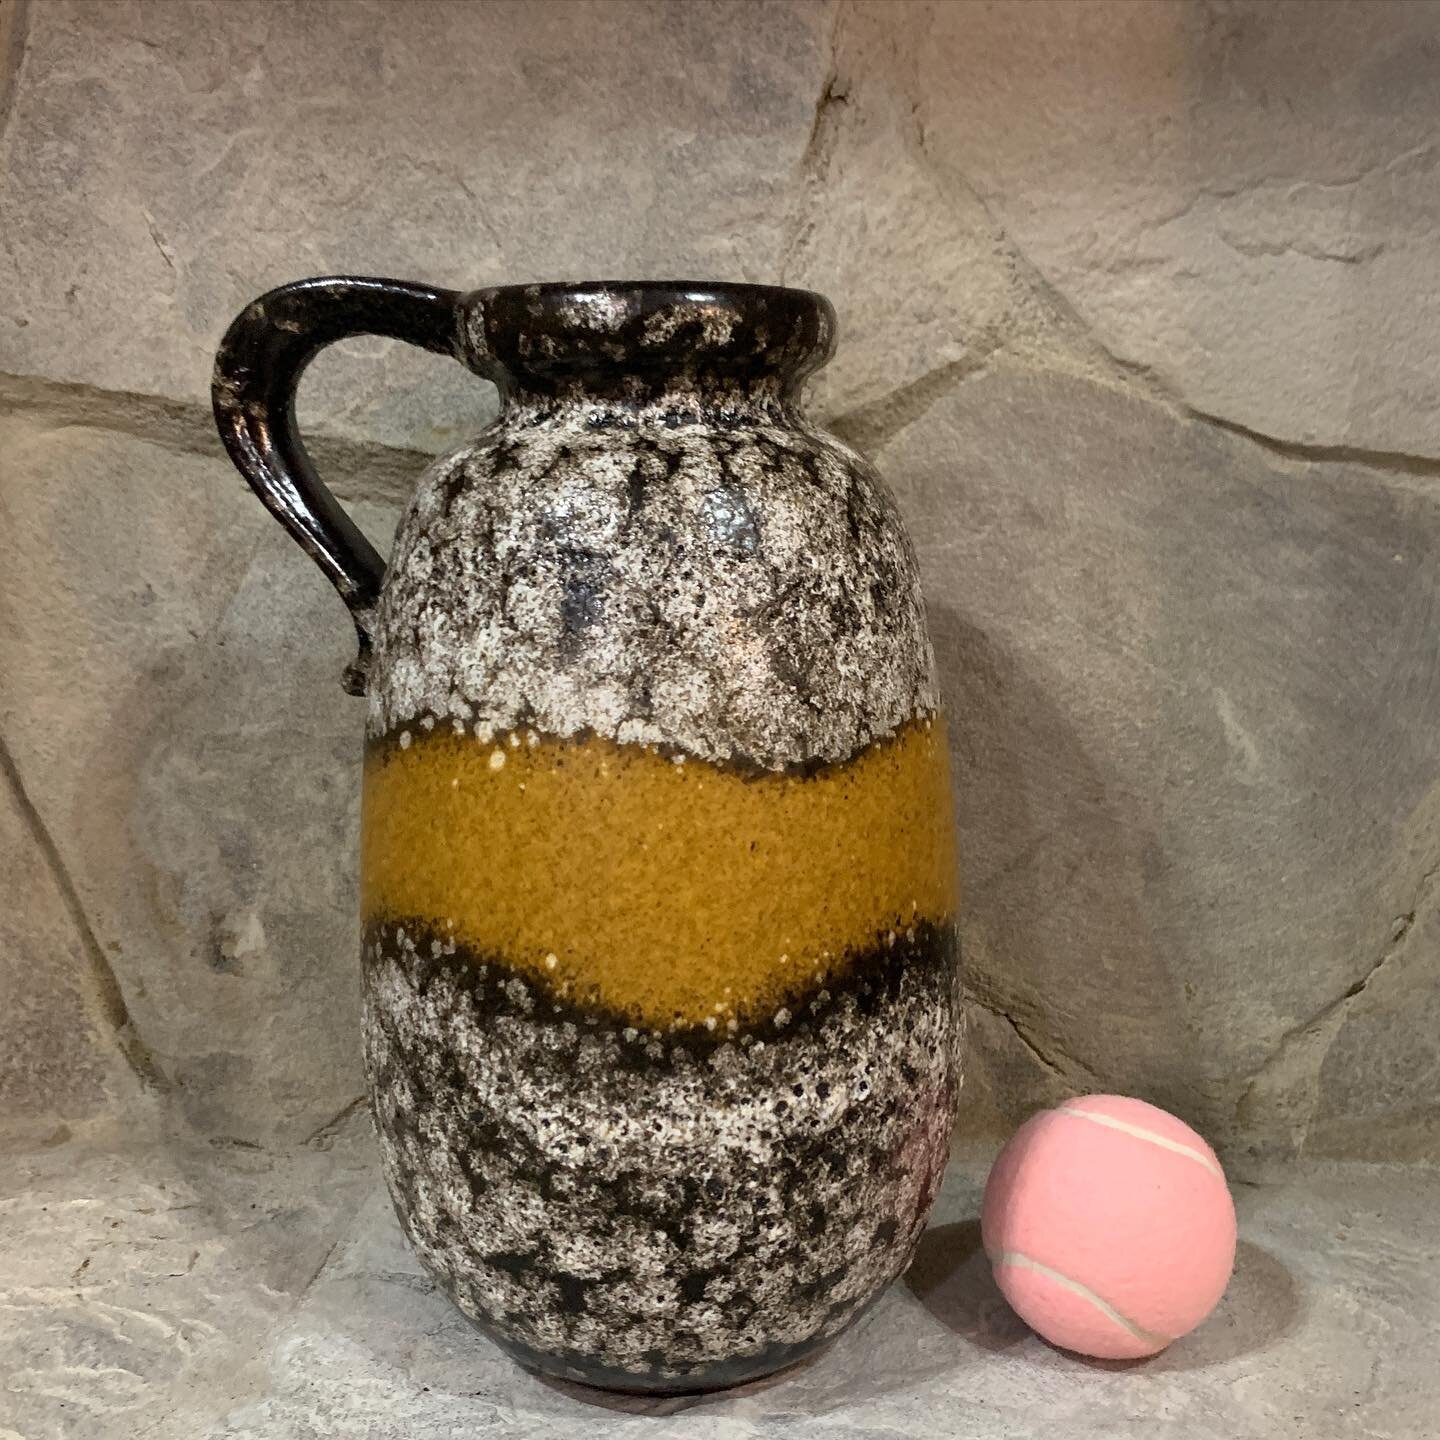 For Sale - Large Scheurich West Germany jug / vase with handle - mottled glaze 484-27

Beautiful colours, a classic mid century vase. Perfect for all sorts of interiors. 
In great condition, no cracks or chips. 

&pound;69 inc uk p&amp;p 
Link in hig